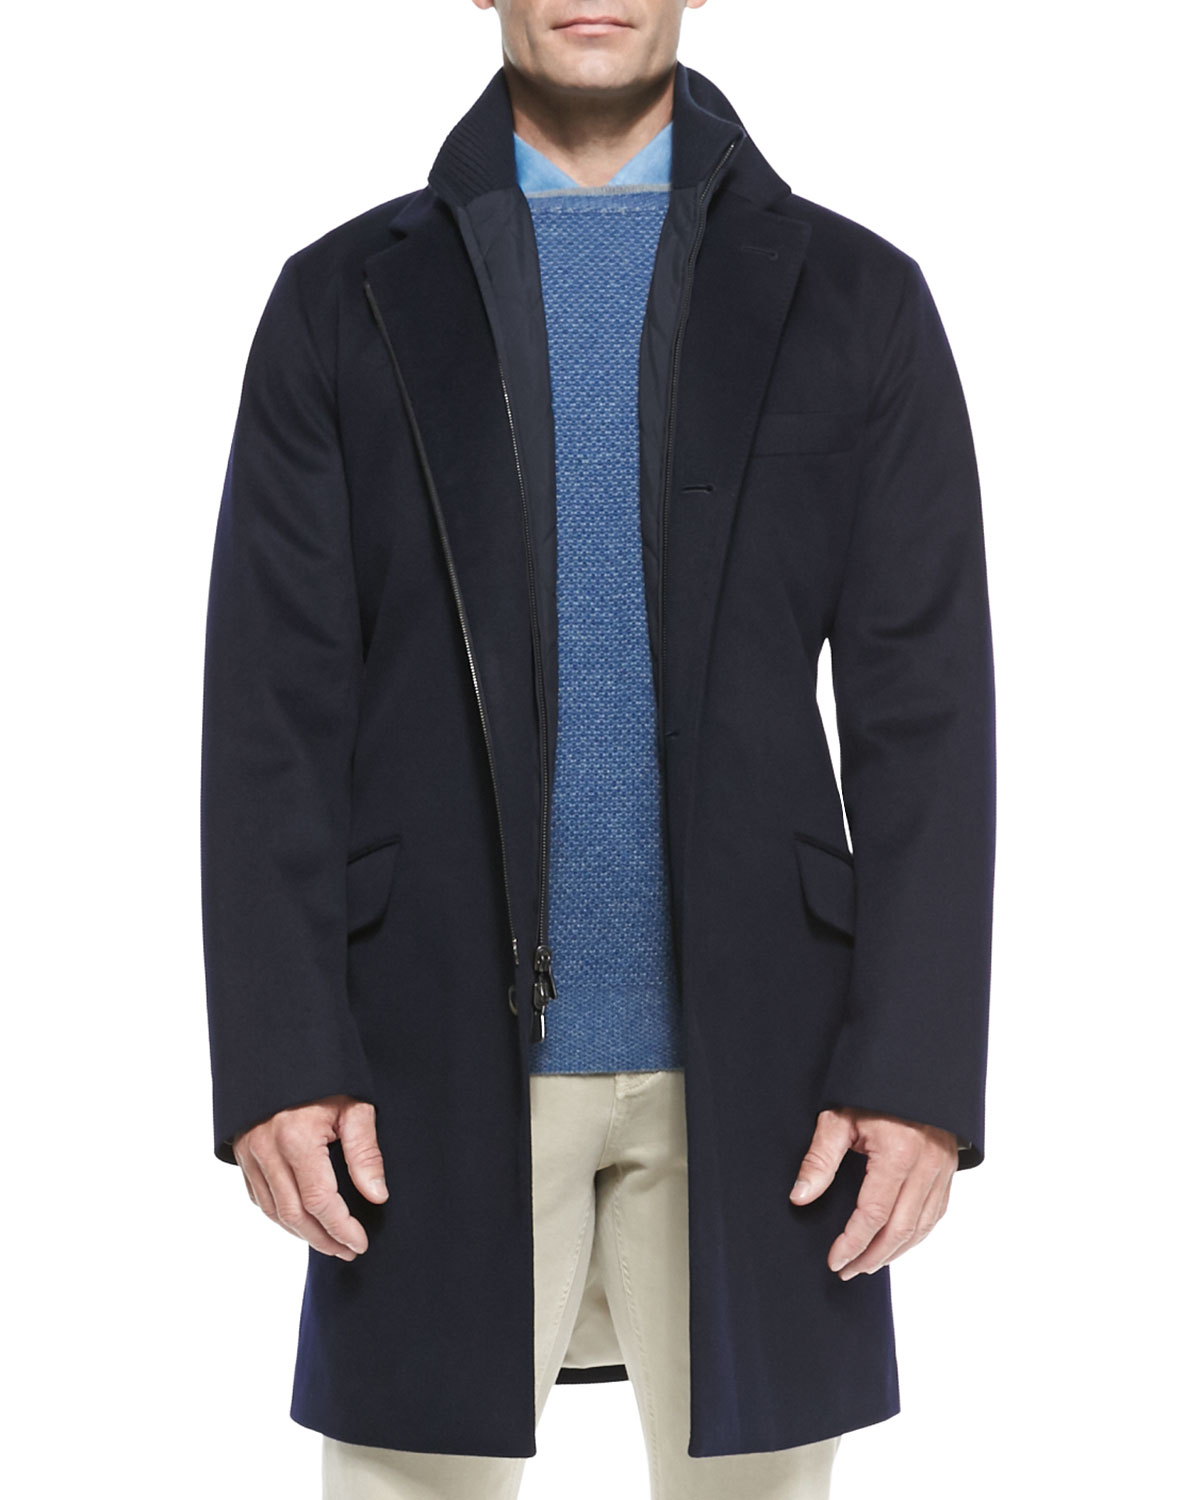 Loro Piana 3-In-1 Martingala Storm System Cashmere Coat in Black for